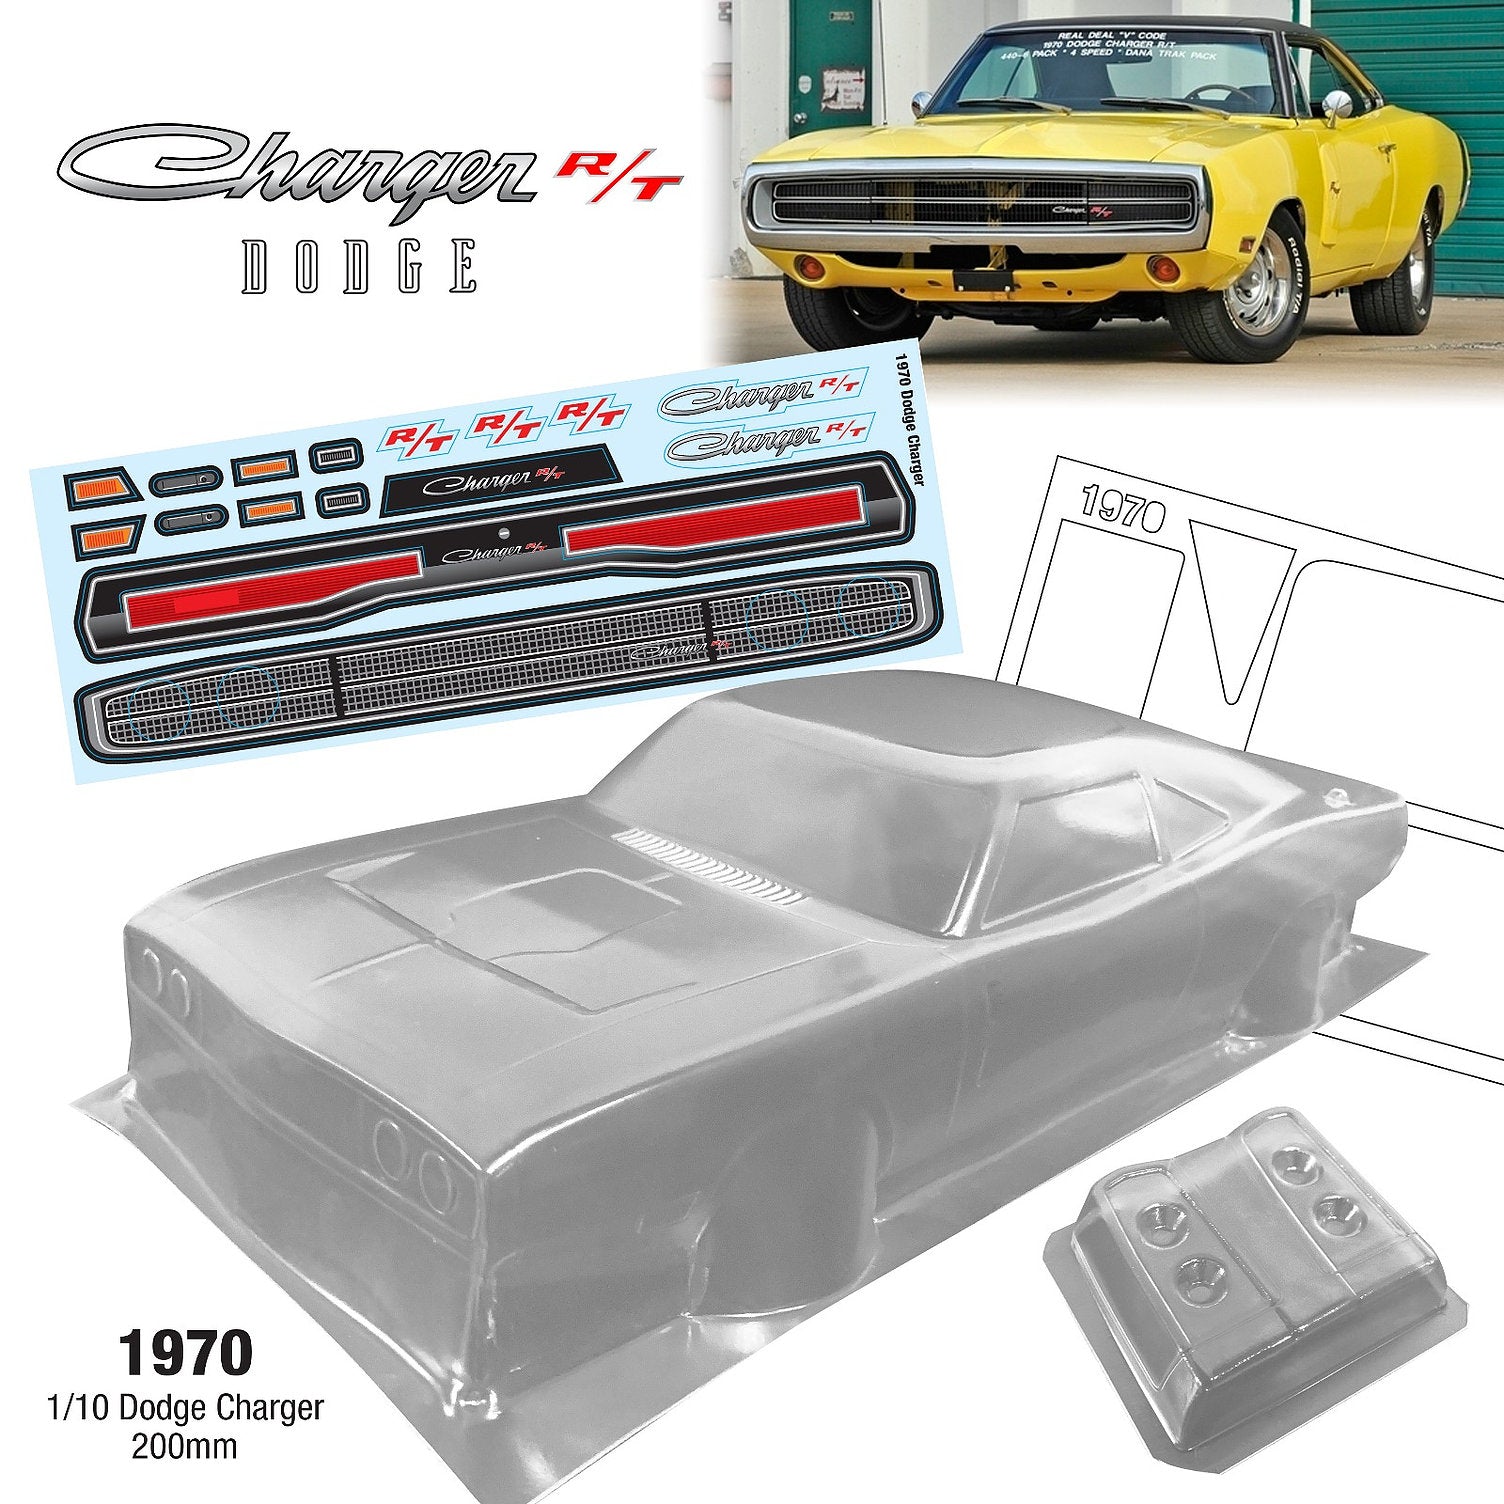 1970 1/10 Dodge Charger, 200mm